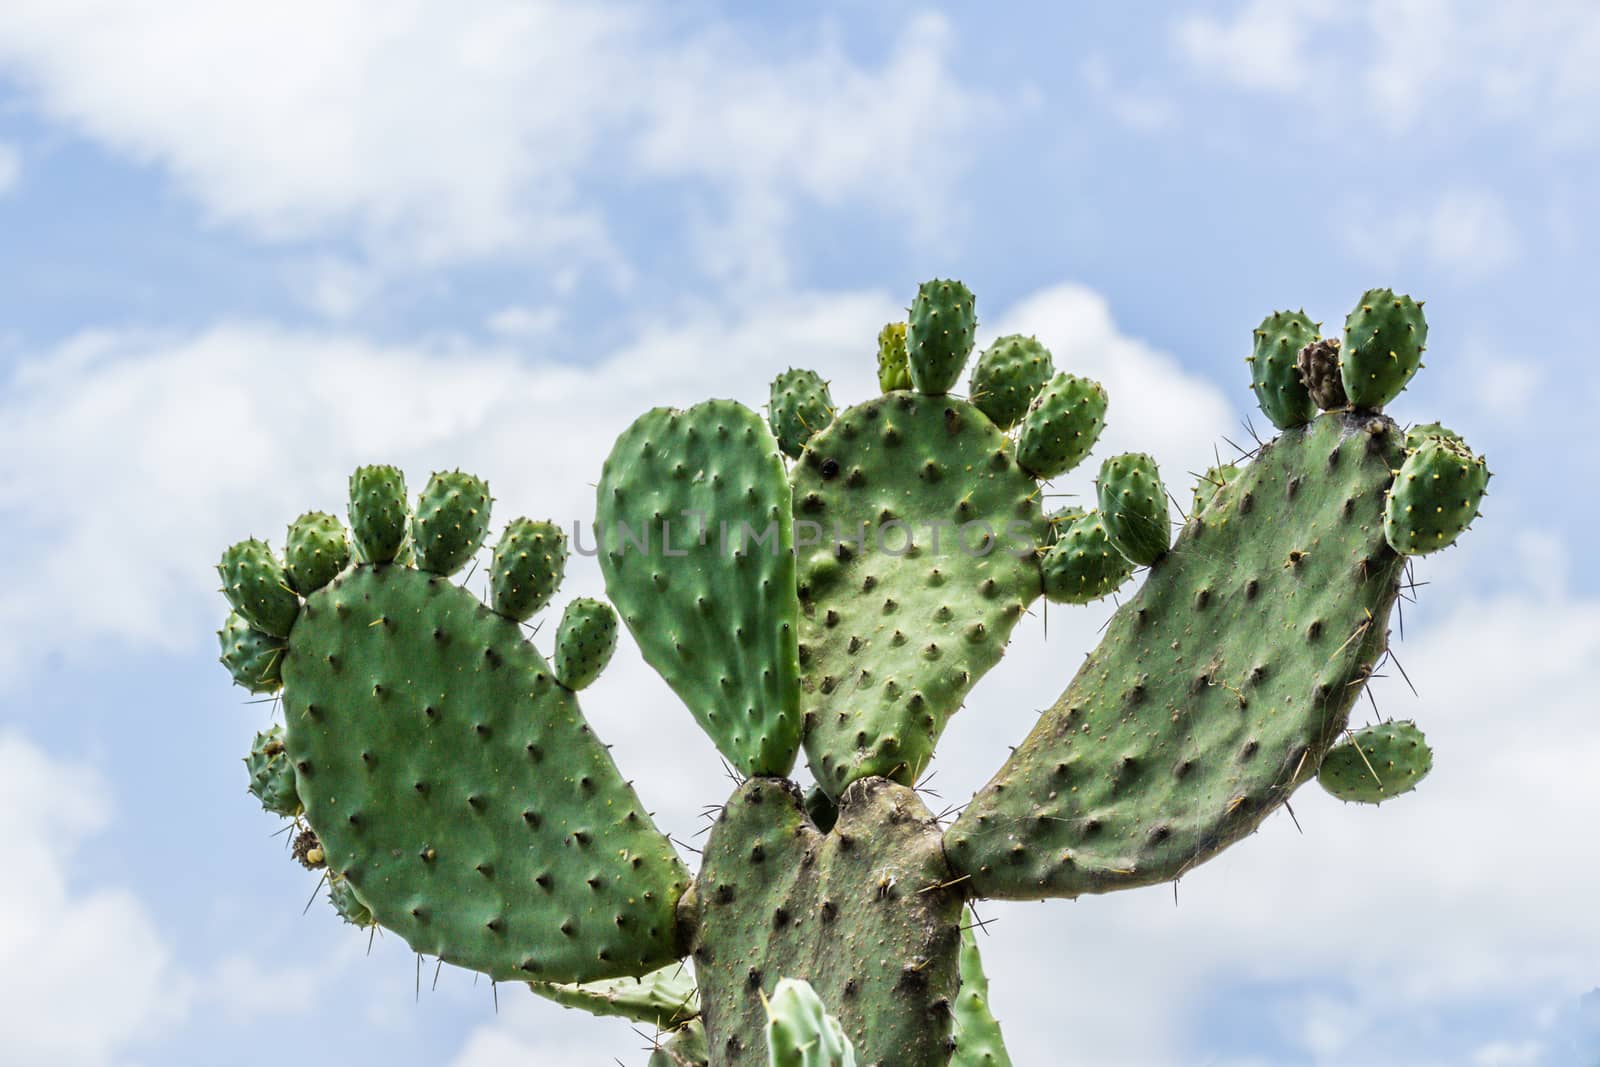 Detail photograph of some green cactus